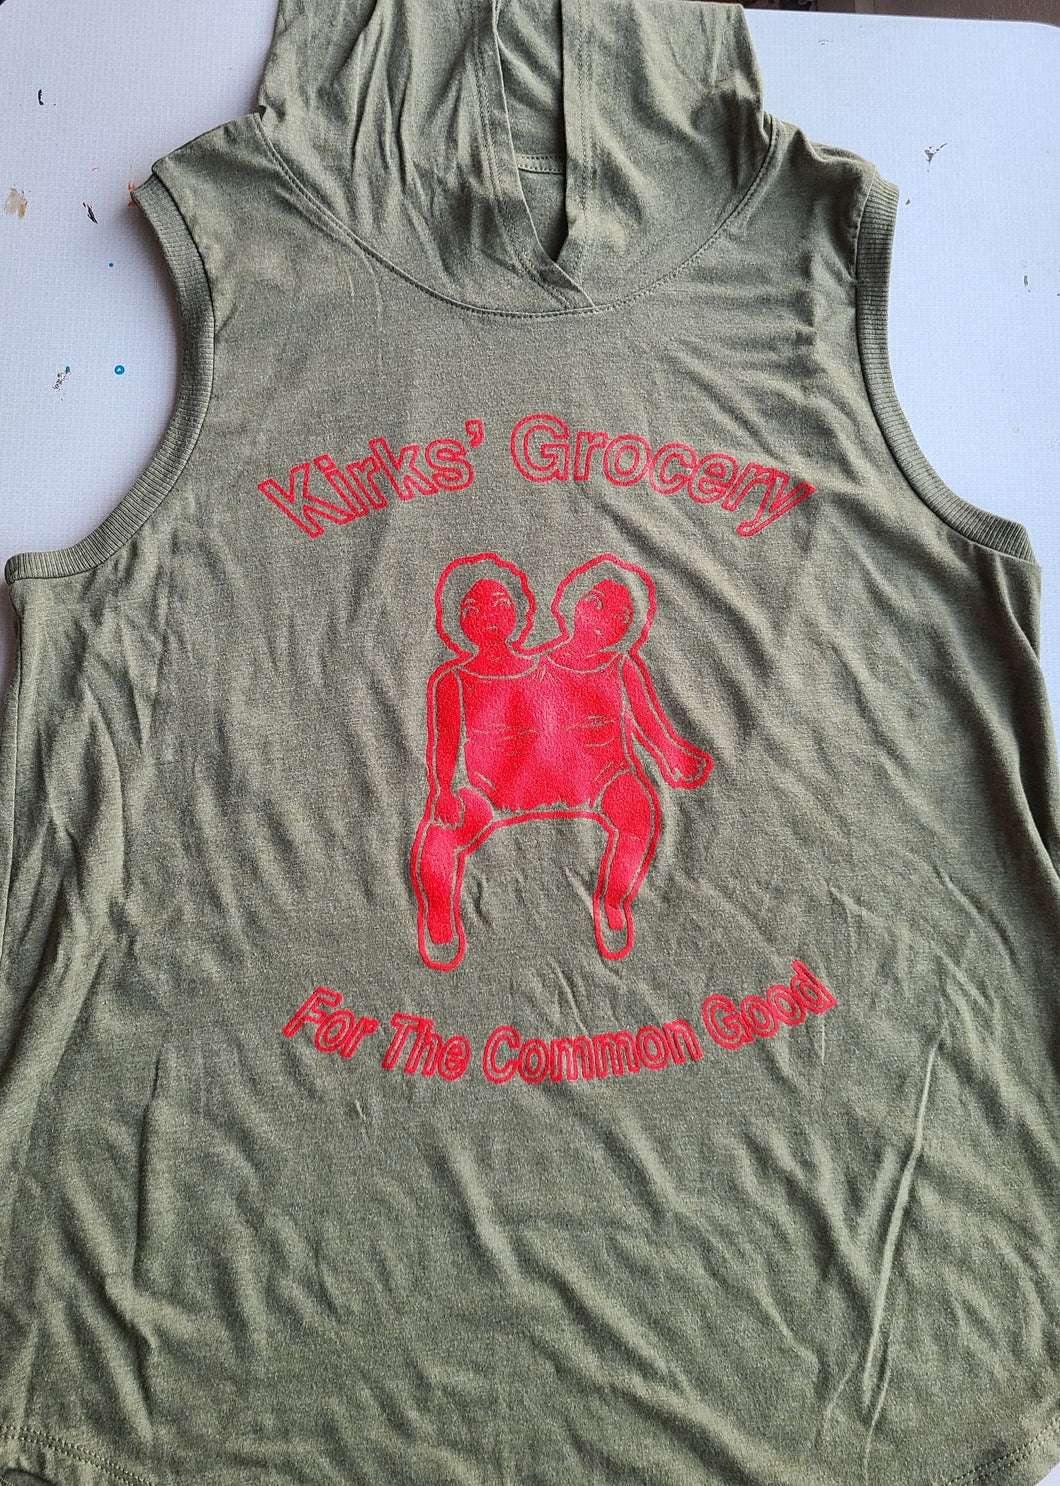 Kirks' Grocery Sleeveless Hoodie |Two Headed Doll (Red on Green)